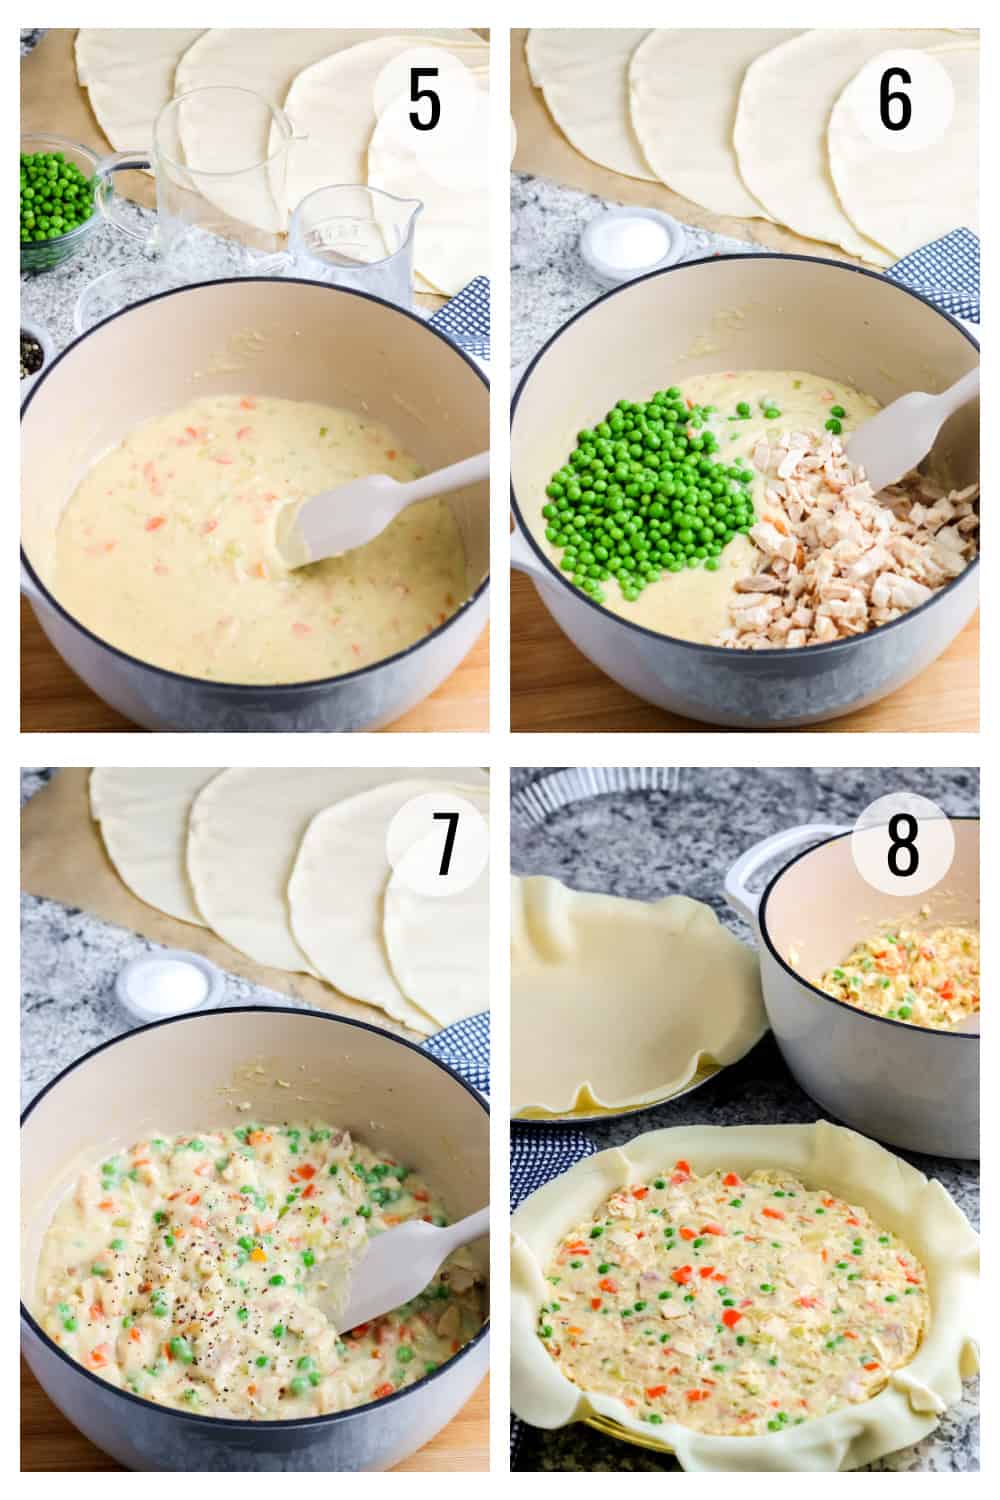 Numbered collage image showing creamy filling for chicken pot pie with addition of peas and cooked chicken then filling pie crusts to bake. 